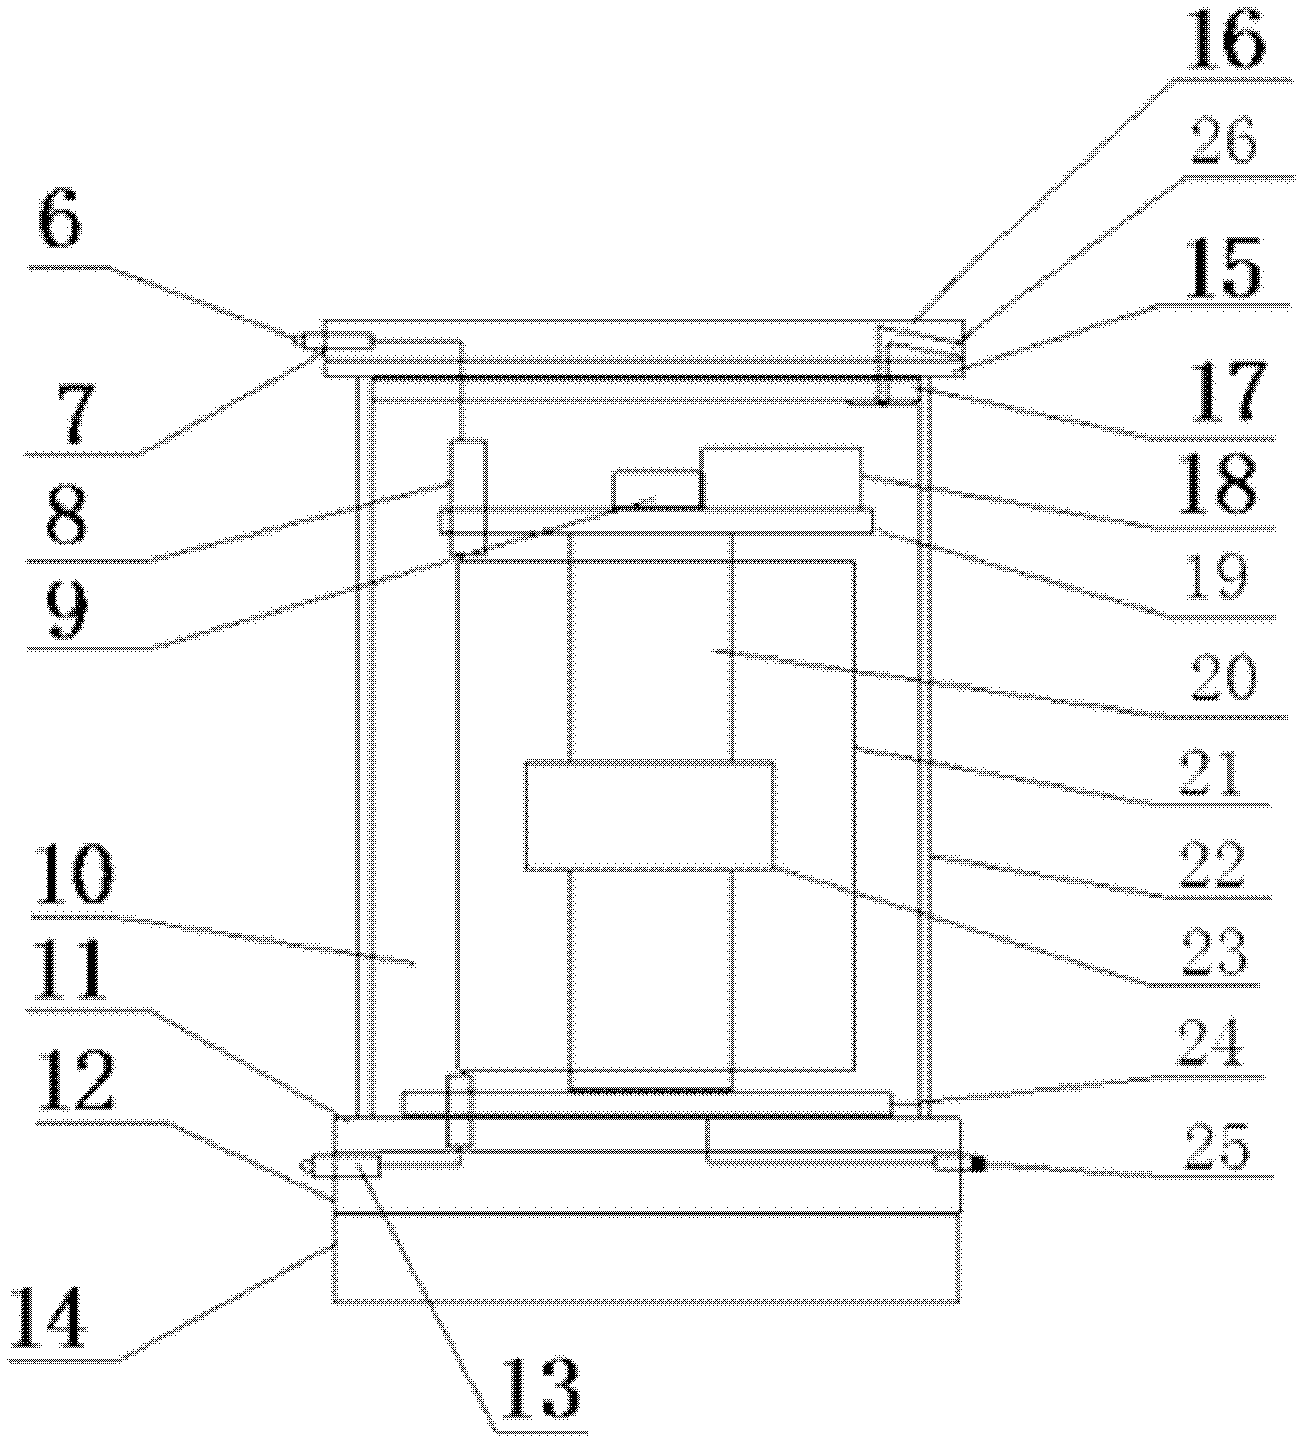 Magnetic valve controllable reactor